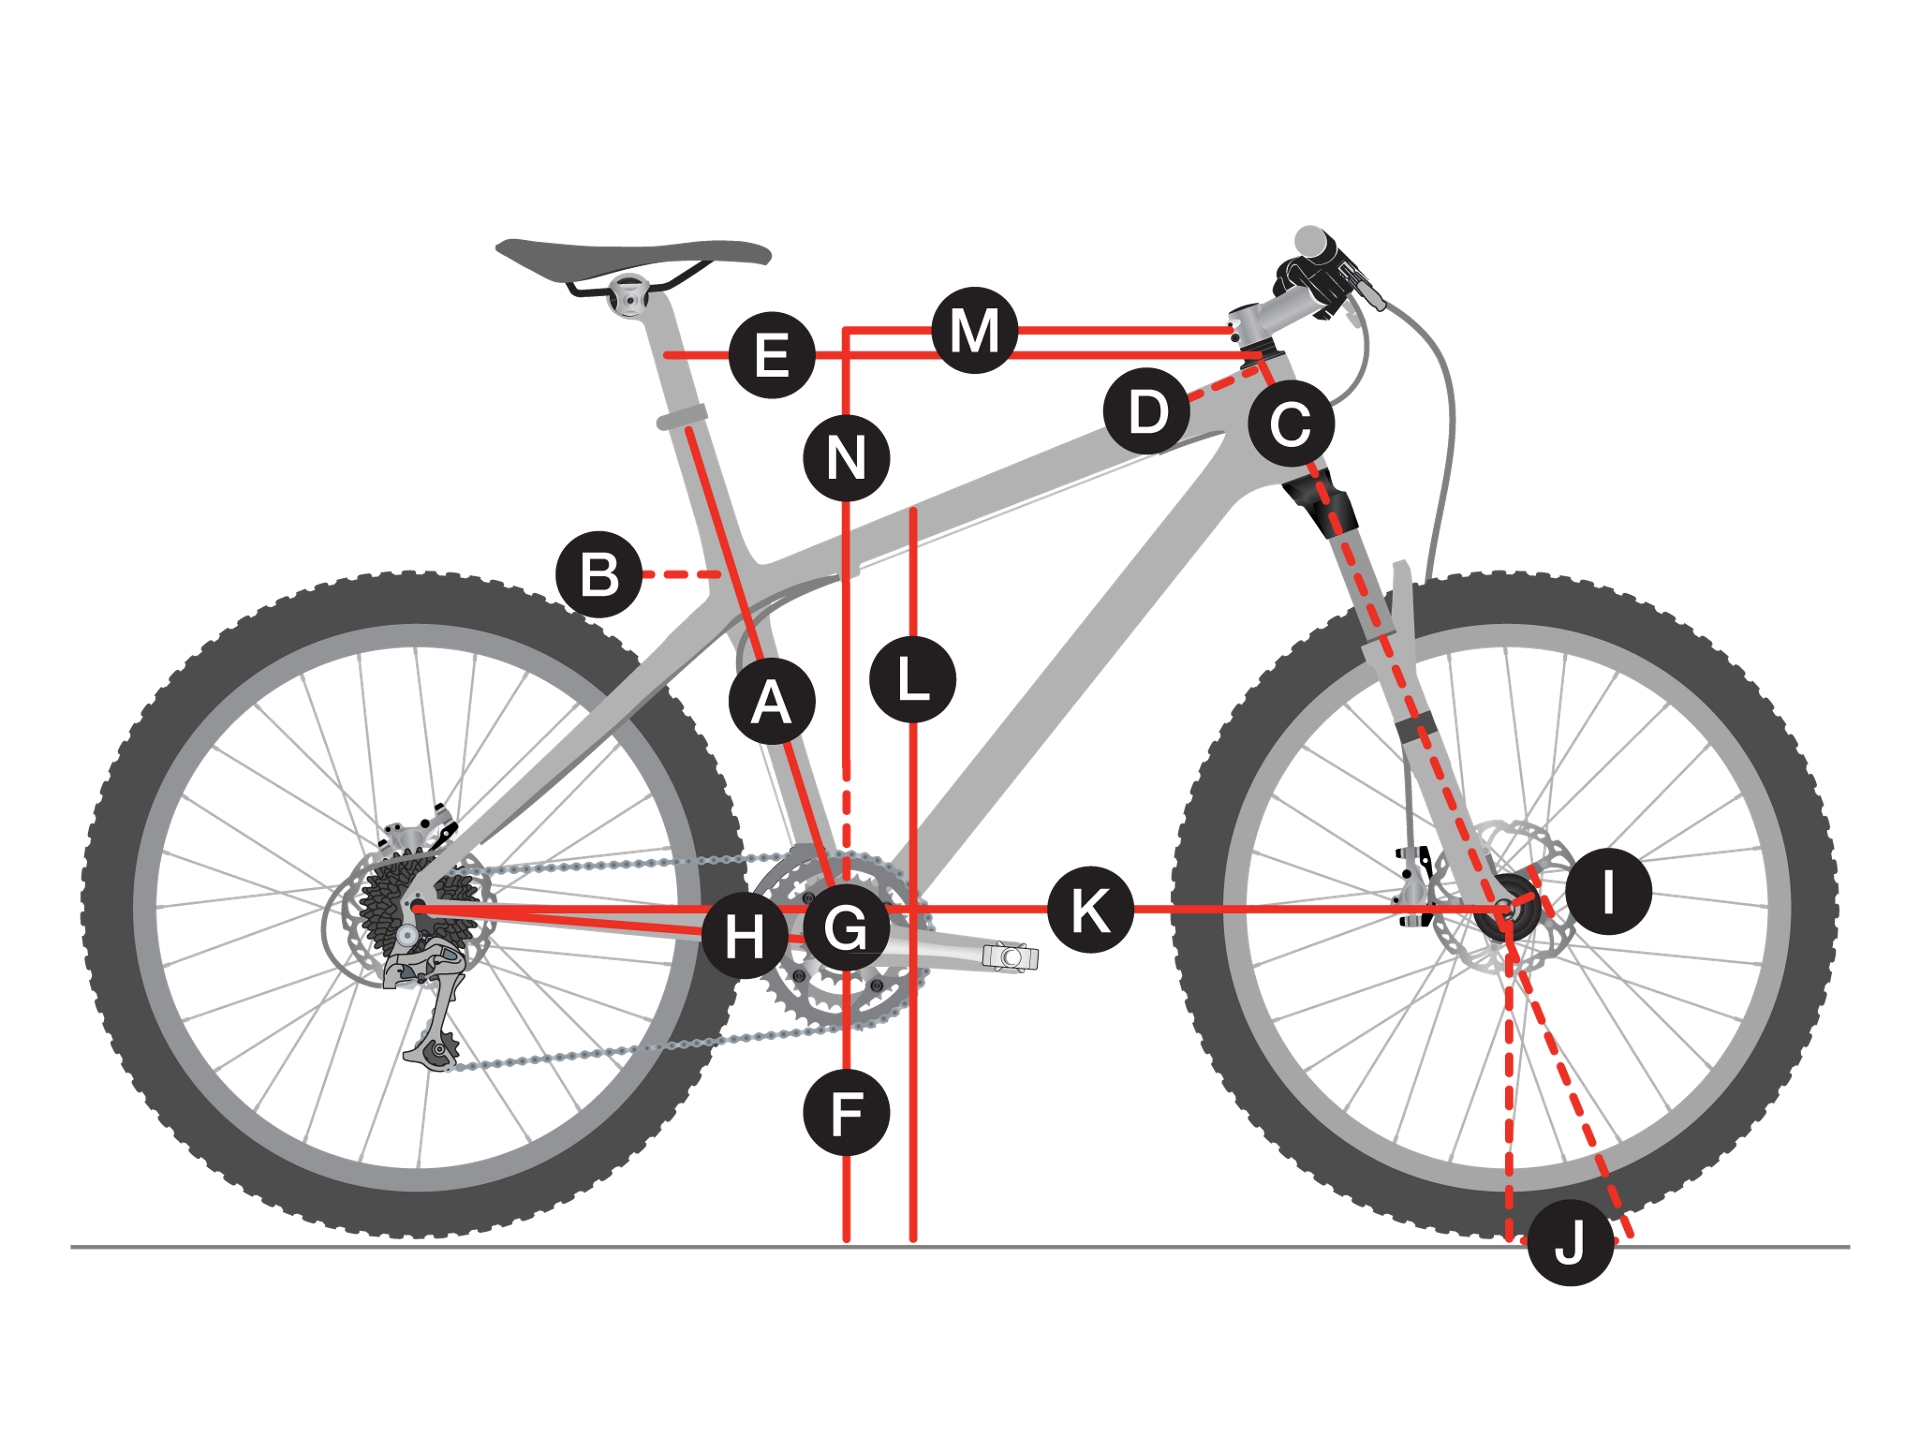 Geometry 14789 MTB Hardtail?$responsive pjpg$&cache=on,on&wid=1920&hei=1440&fit=fit,1